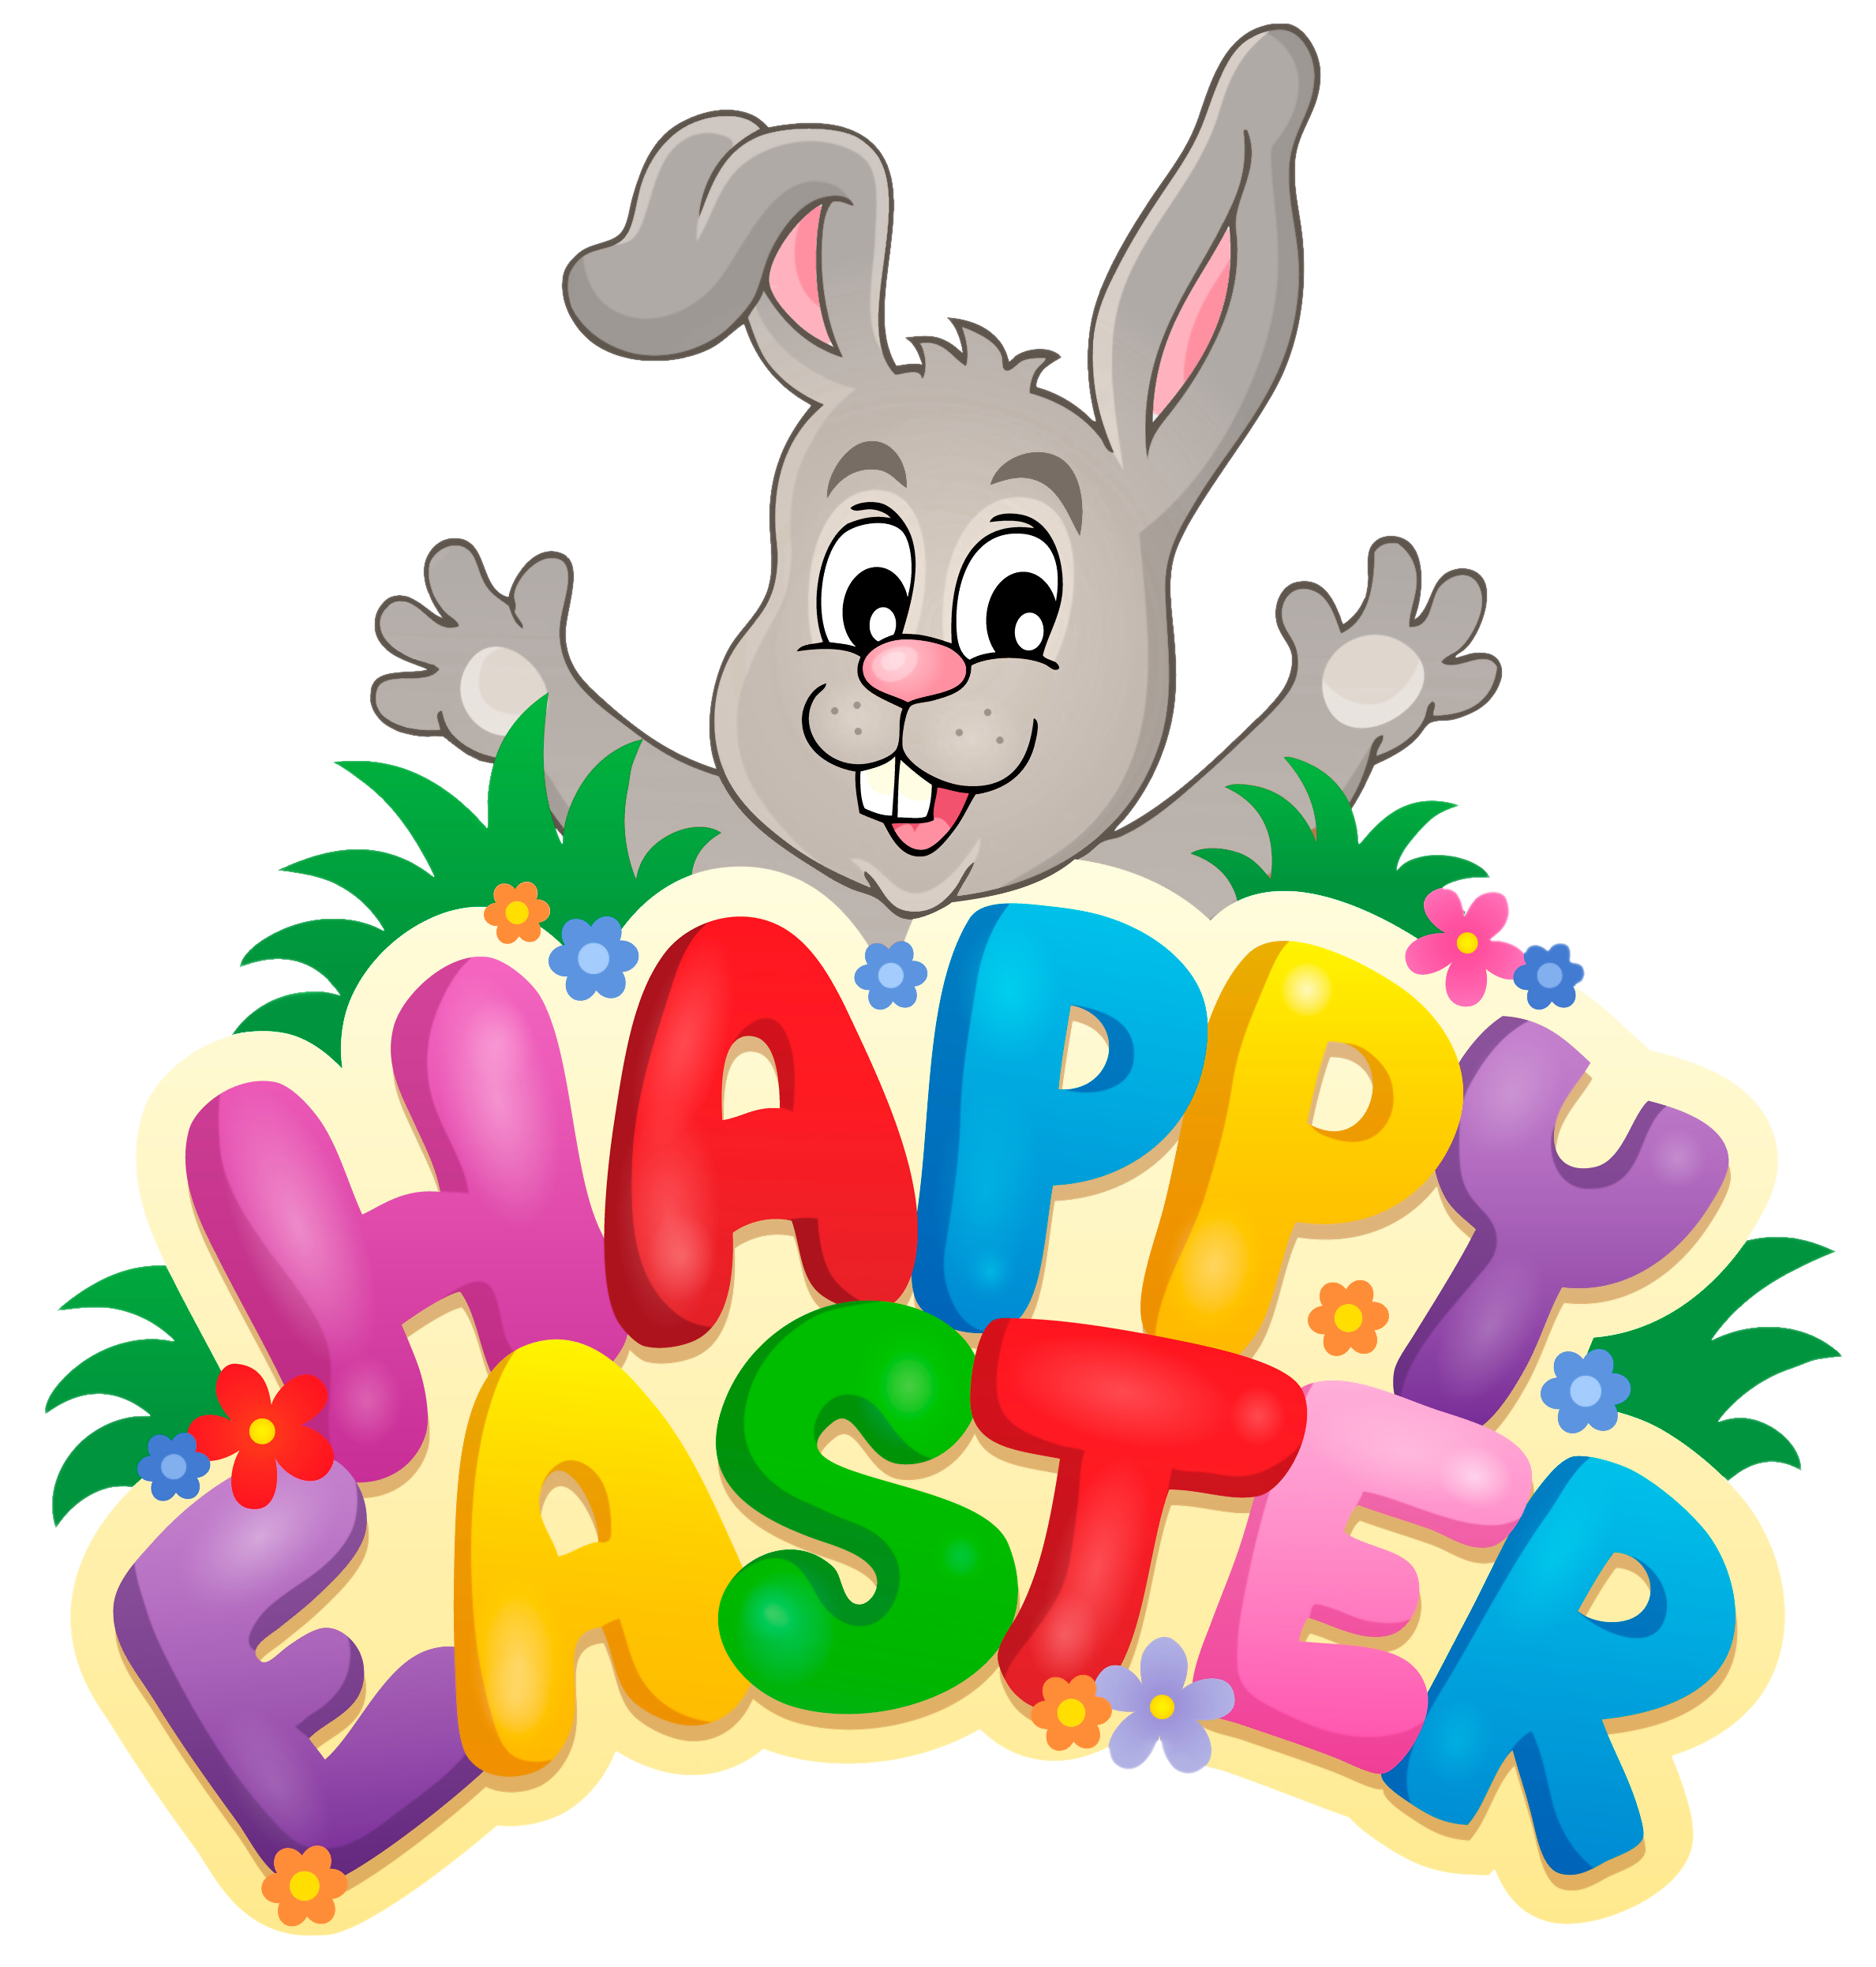 Transparent_Happy_Easter_with_Bunny_PNG_Clipart_Picture.png